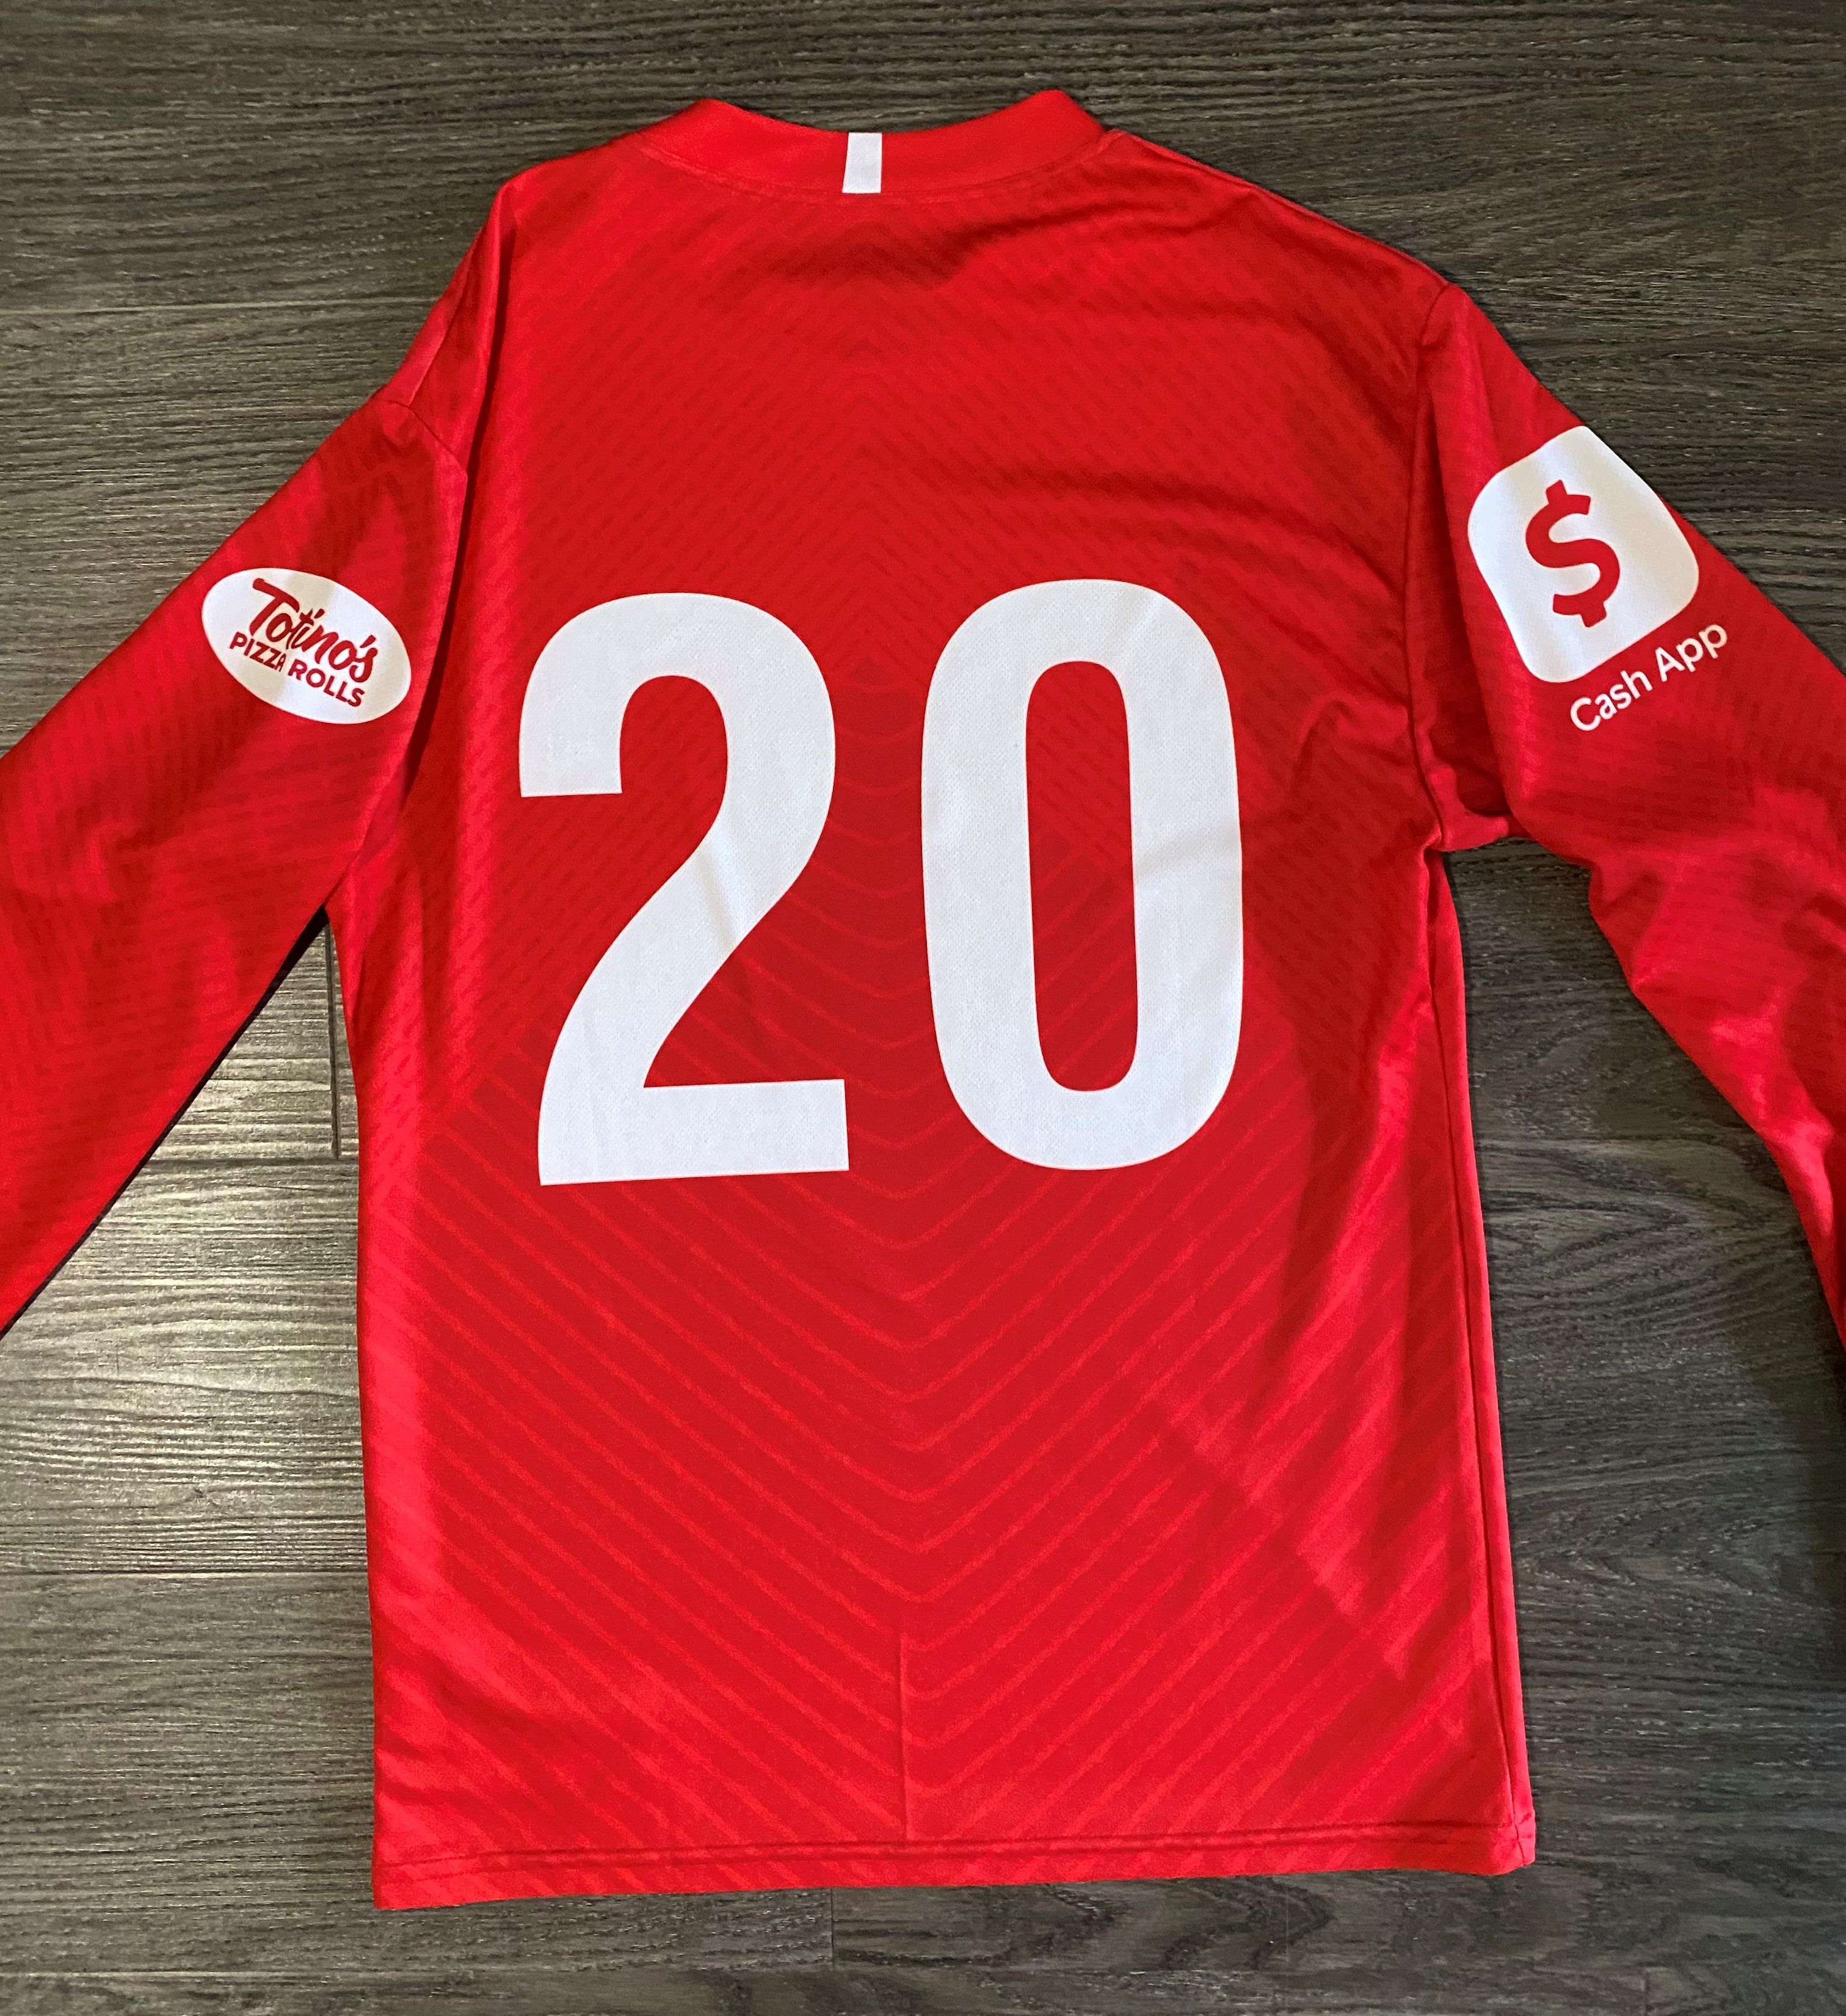 100 Thieves 100 Thieves 2020 Jersey Size US M / EU 48-50 / 2 - 2 Preview